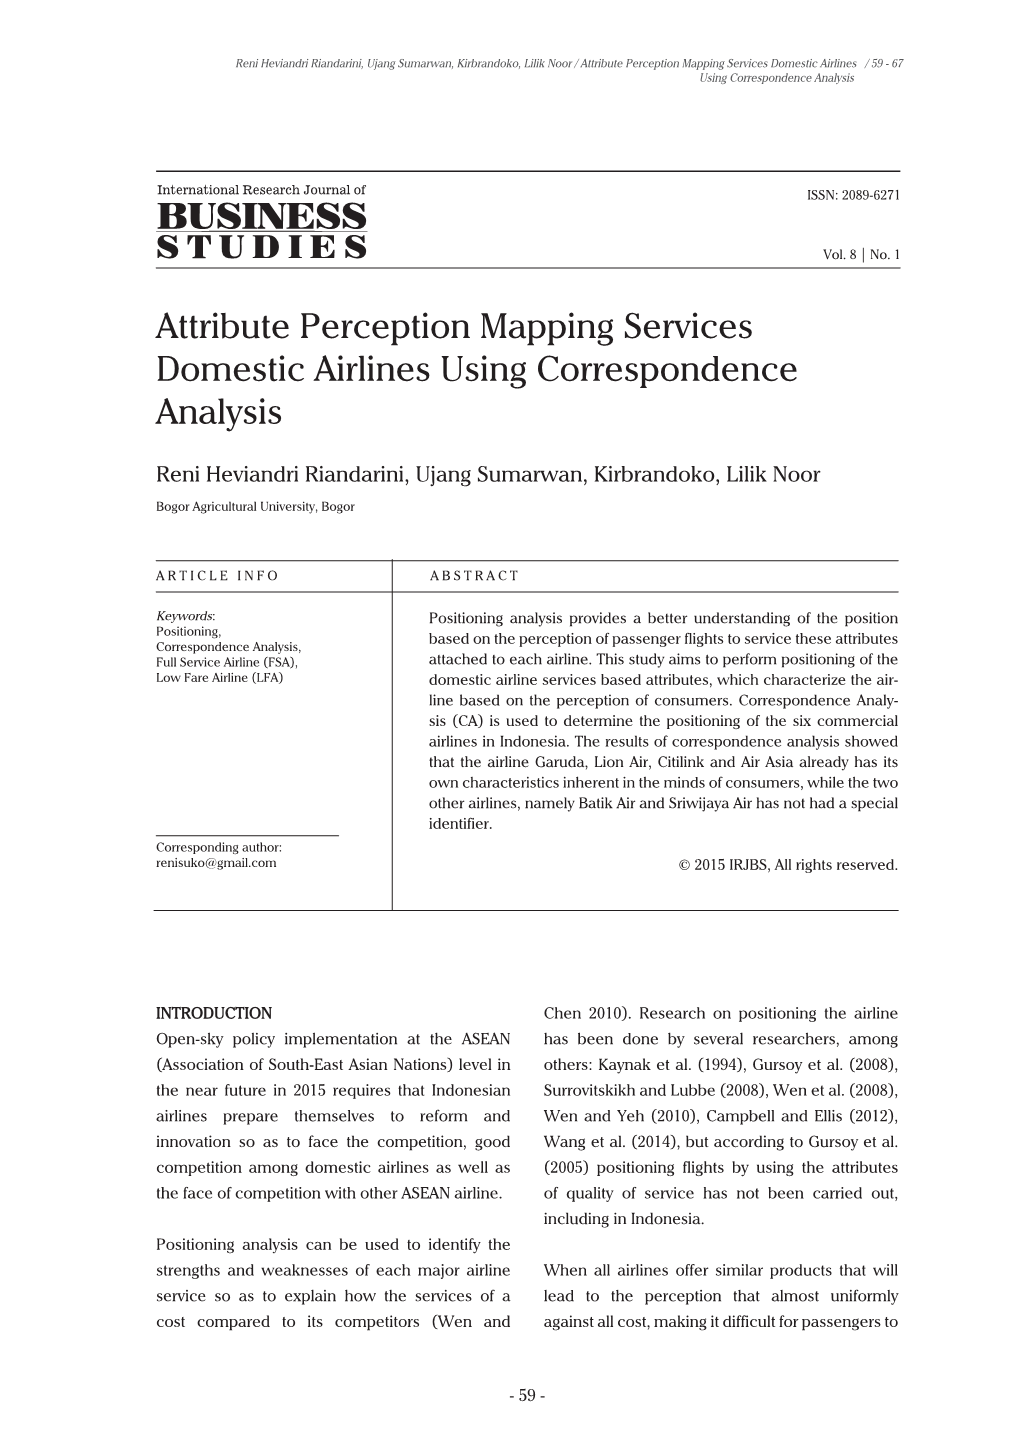 Attribute Perception Mapping Services Domestic Airlines Using Correspondence Analysis